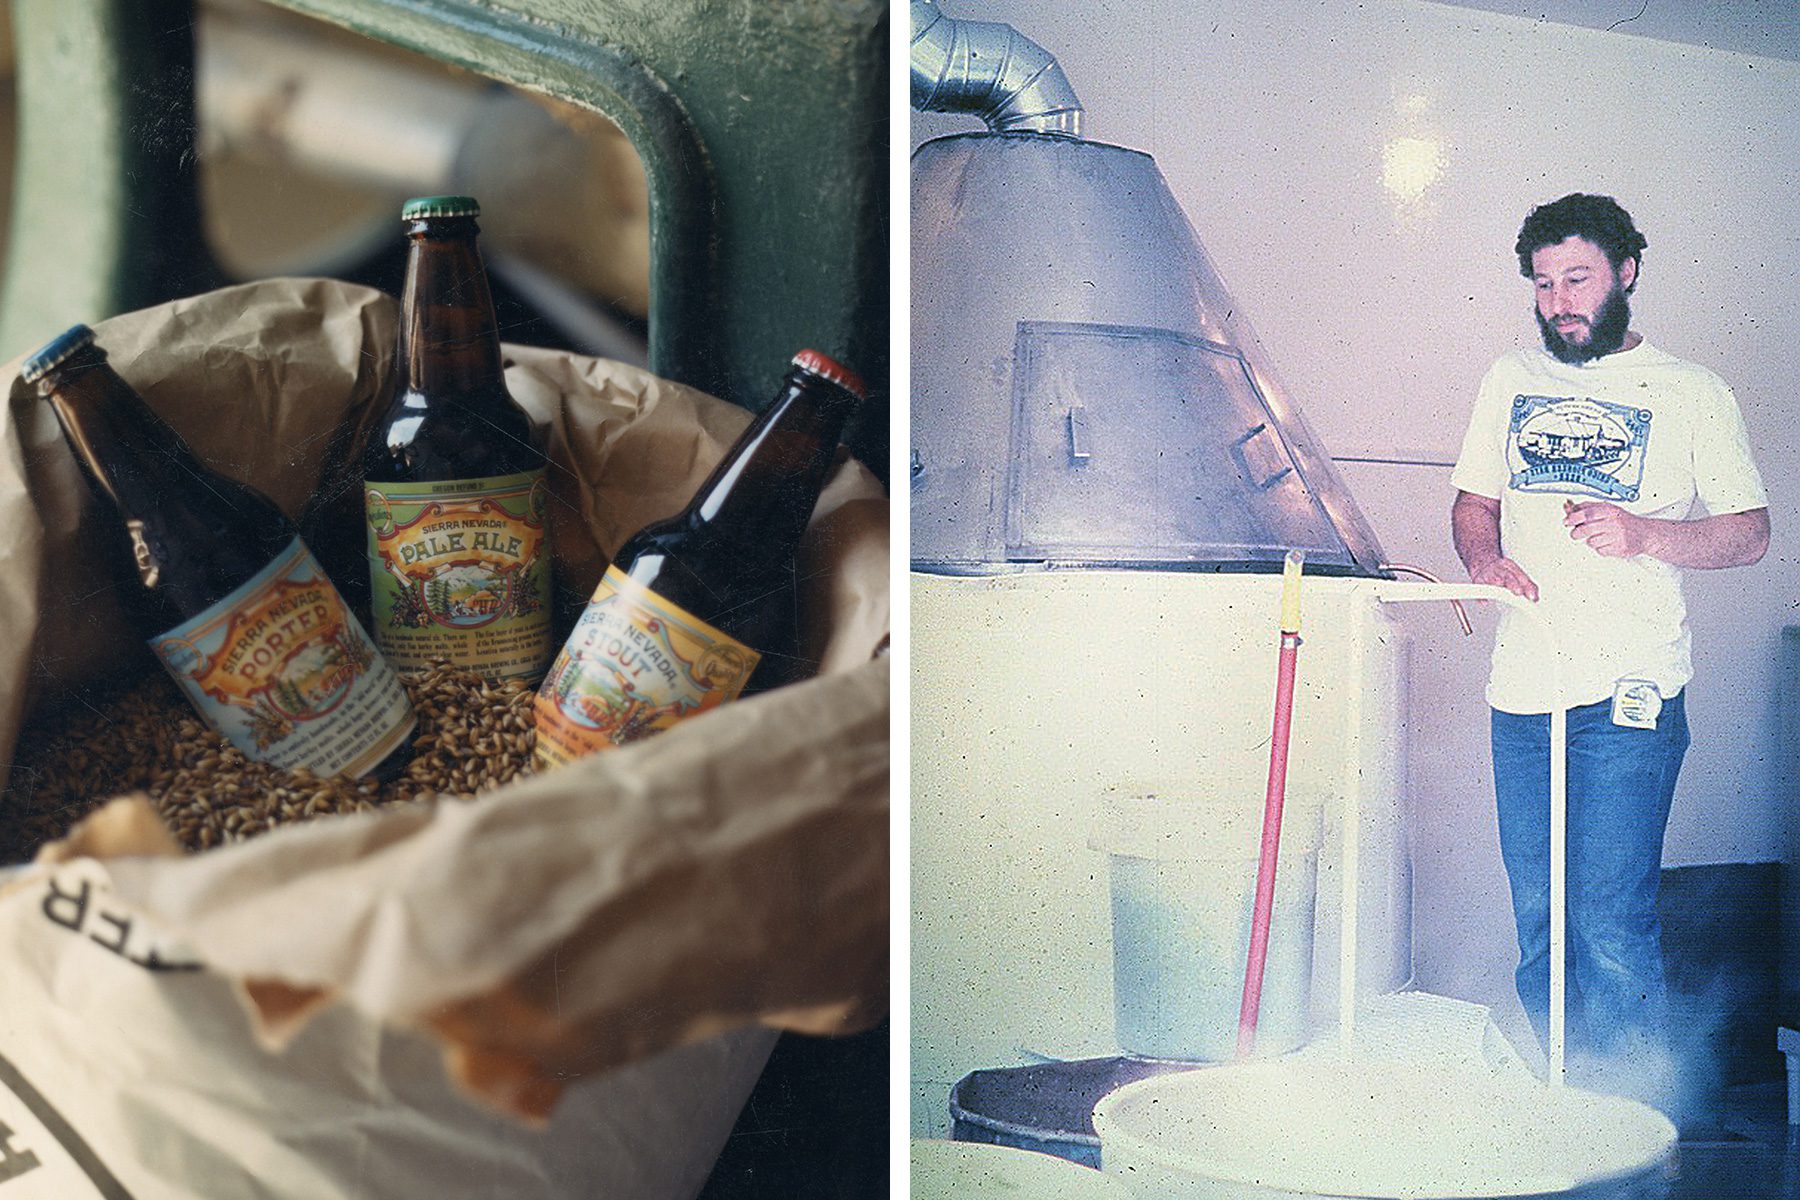 Three bottles of Sierra Nevada beer from the 1980s and brewery founder Ken Grossman